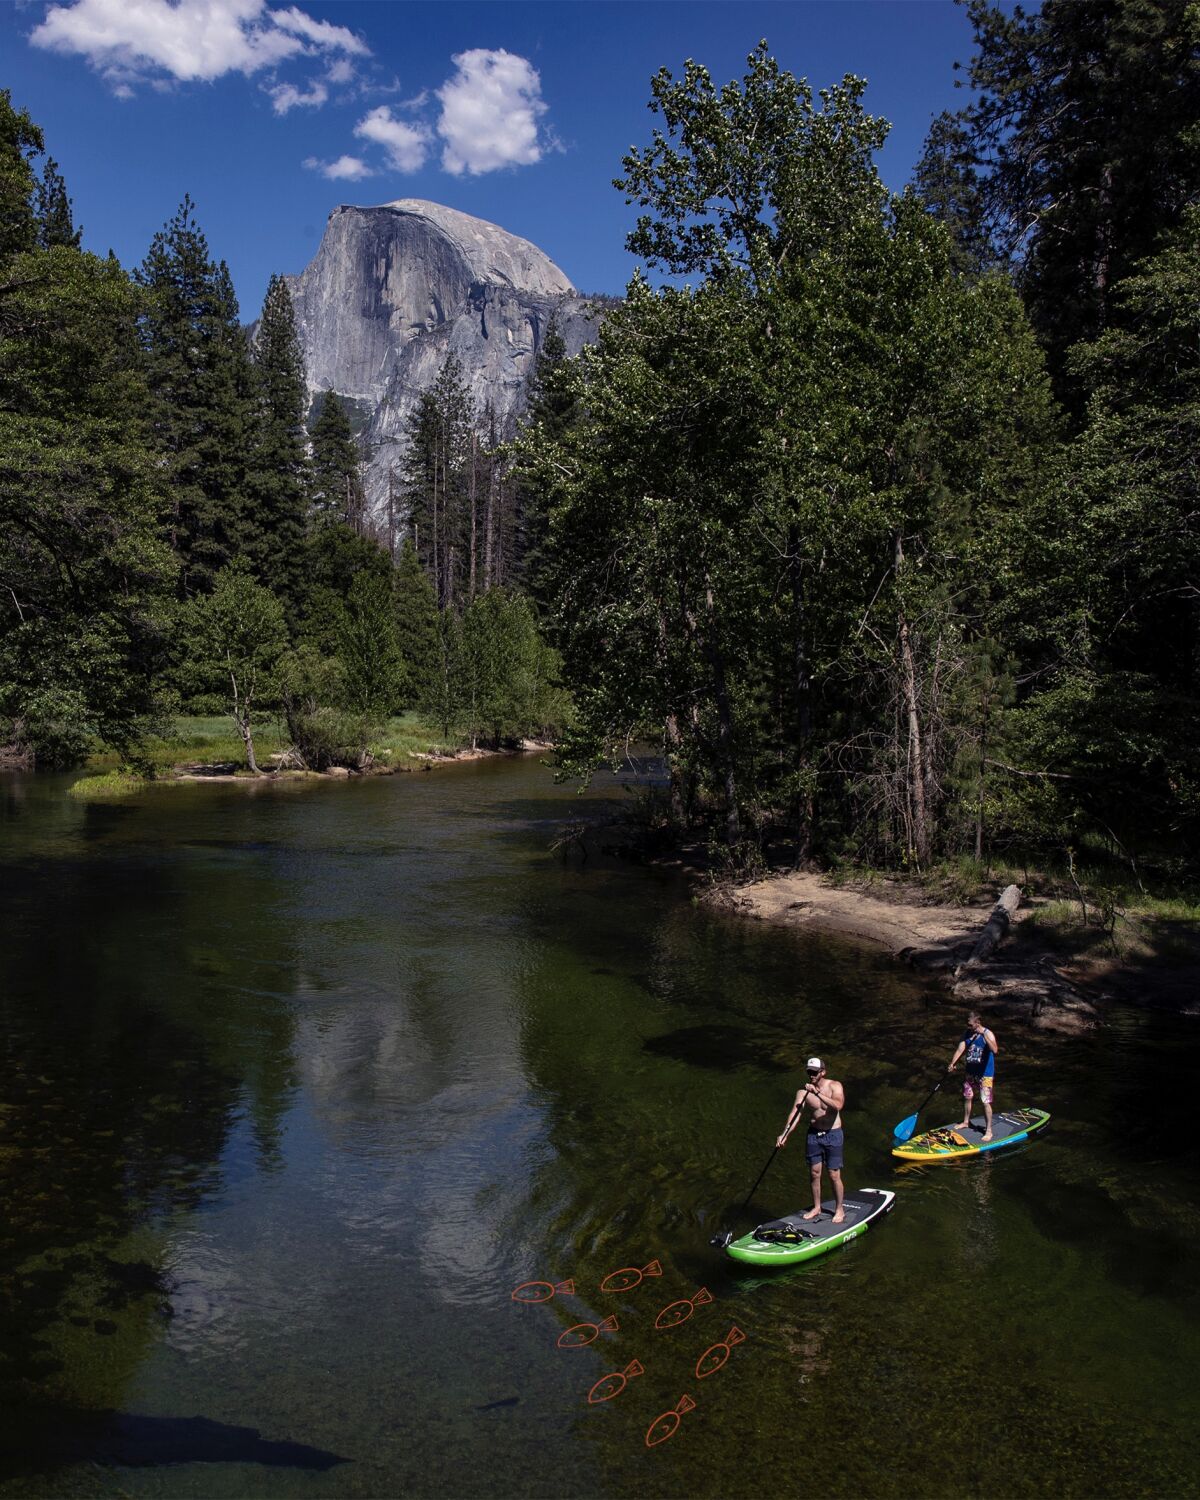 Paddle boarders on the Merced River in Yosemite Valley.